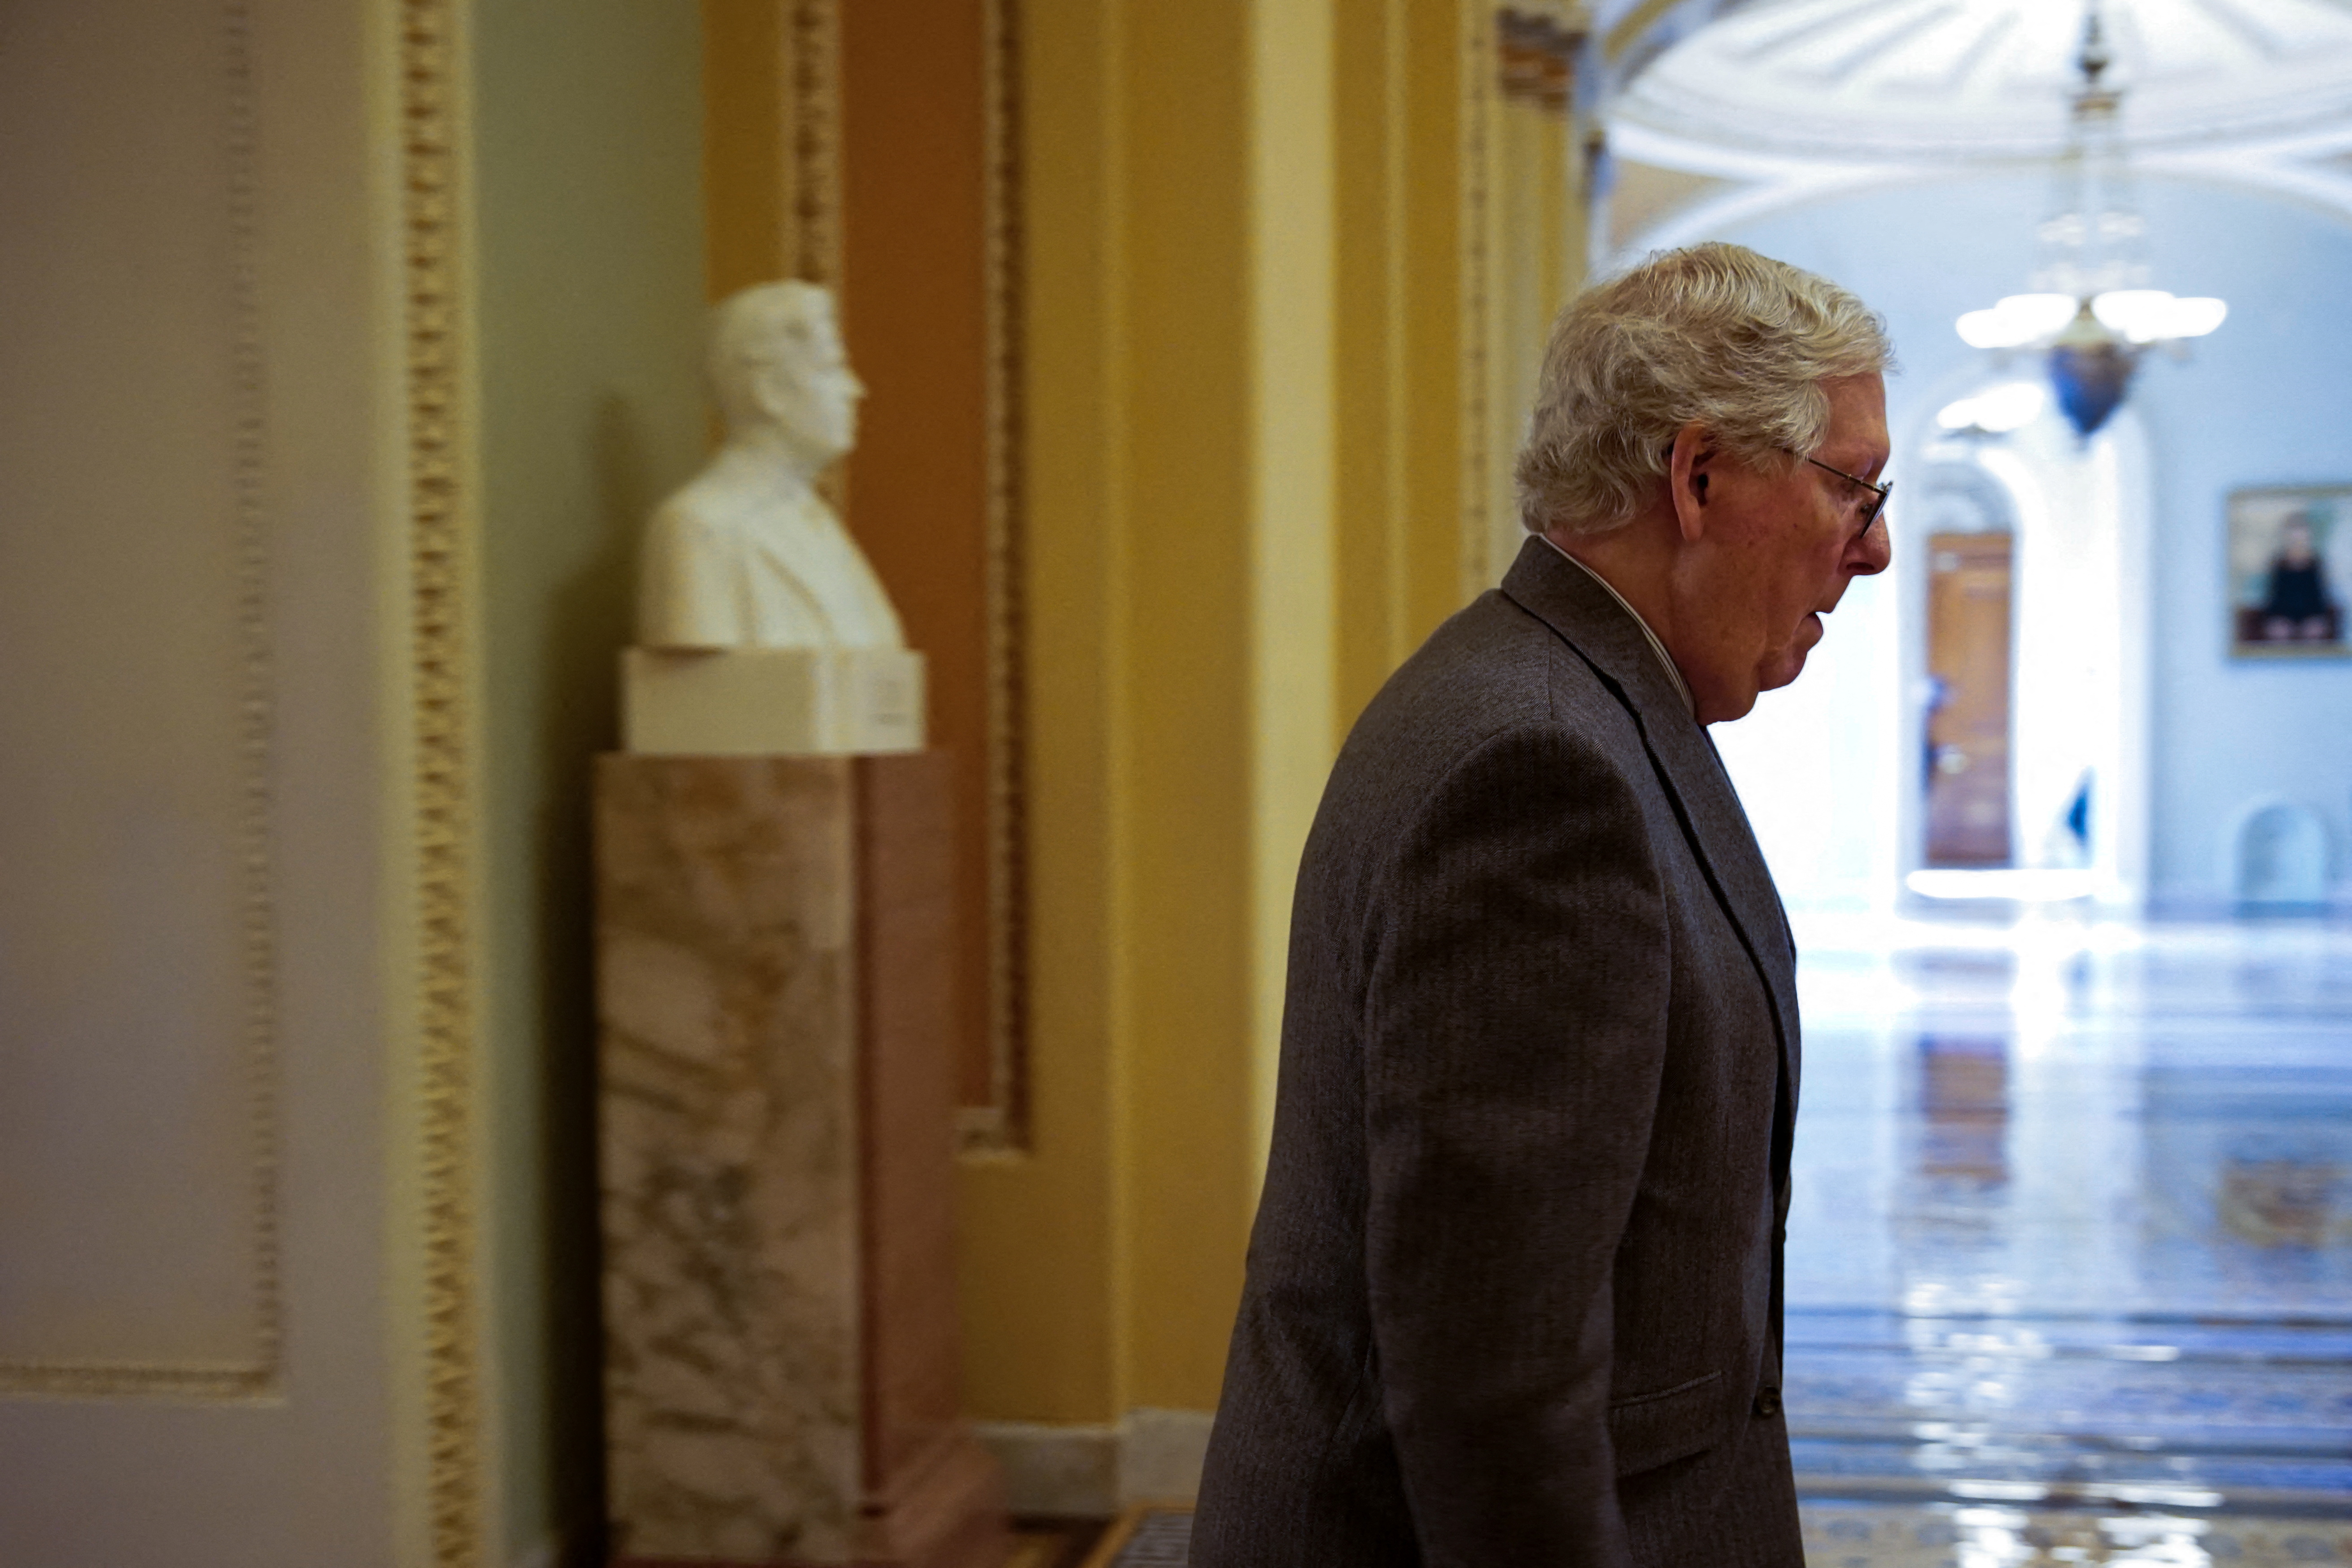 U.S. Senate Minority Leader Mitch McConnell (R-KY) walks to the Senate floor at the U.S. Capitol in Washington